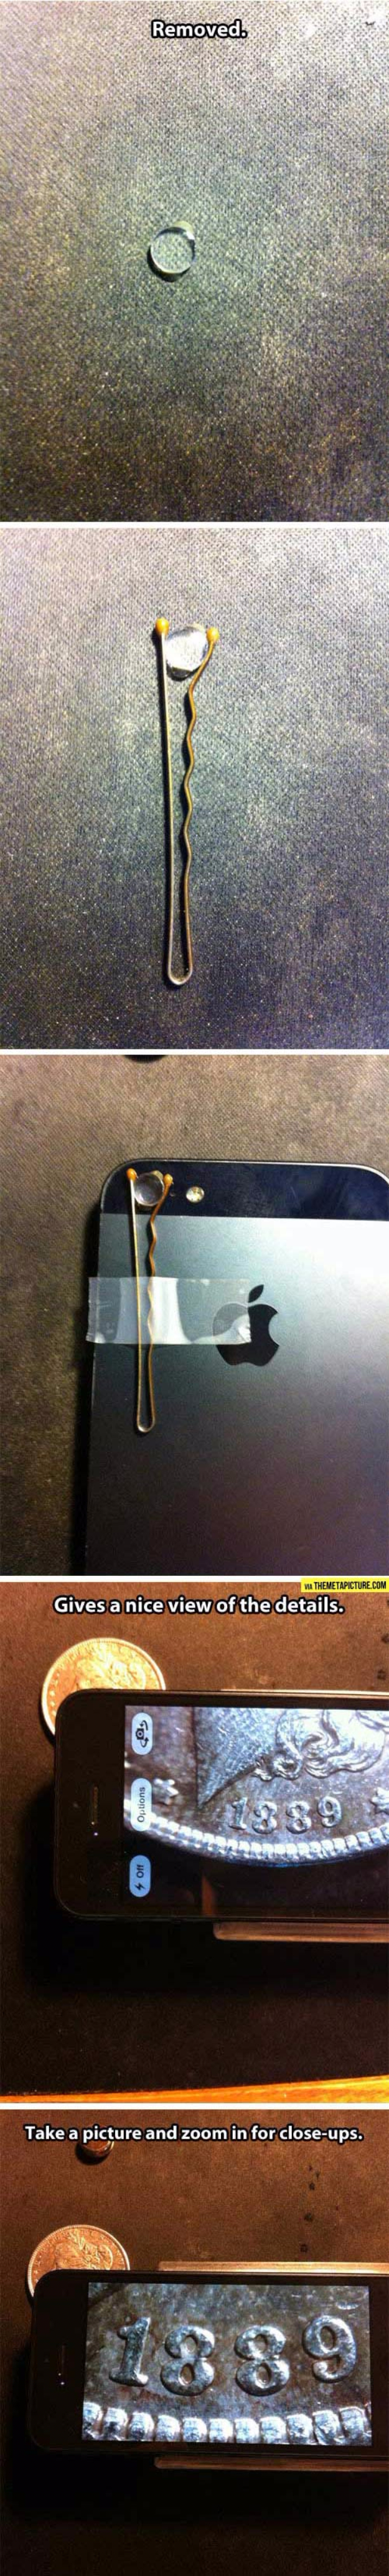 15 Clever DIY Ideas And Hacks For Your Smartphone